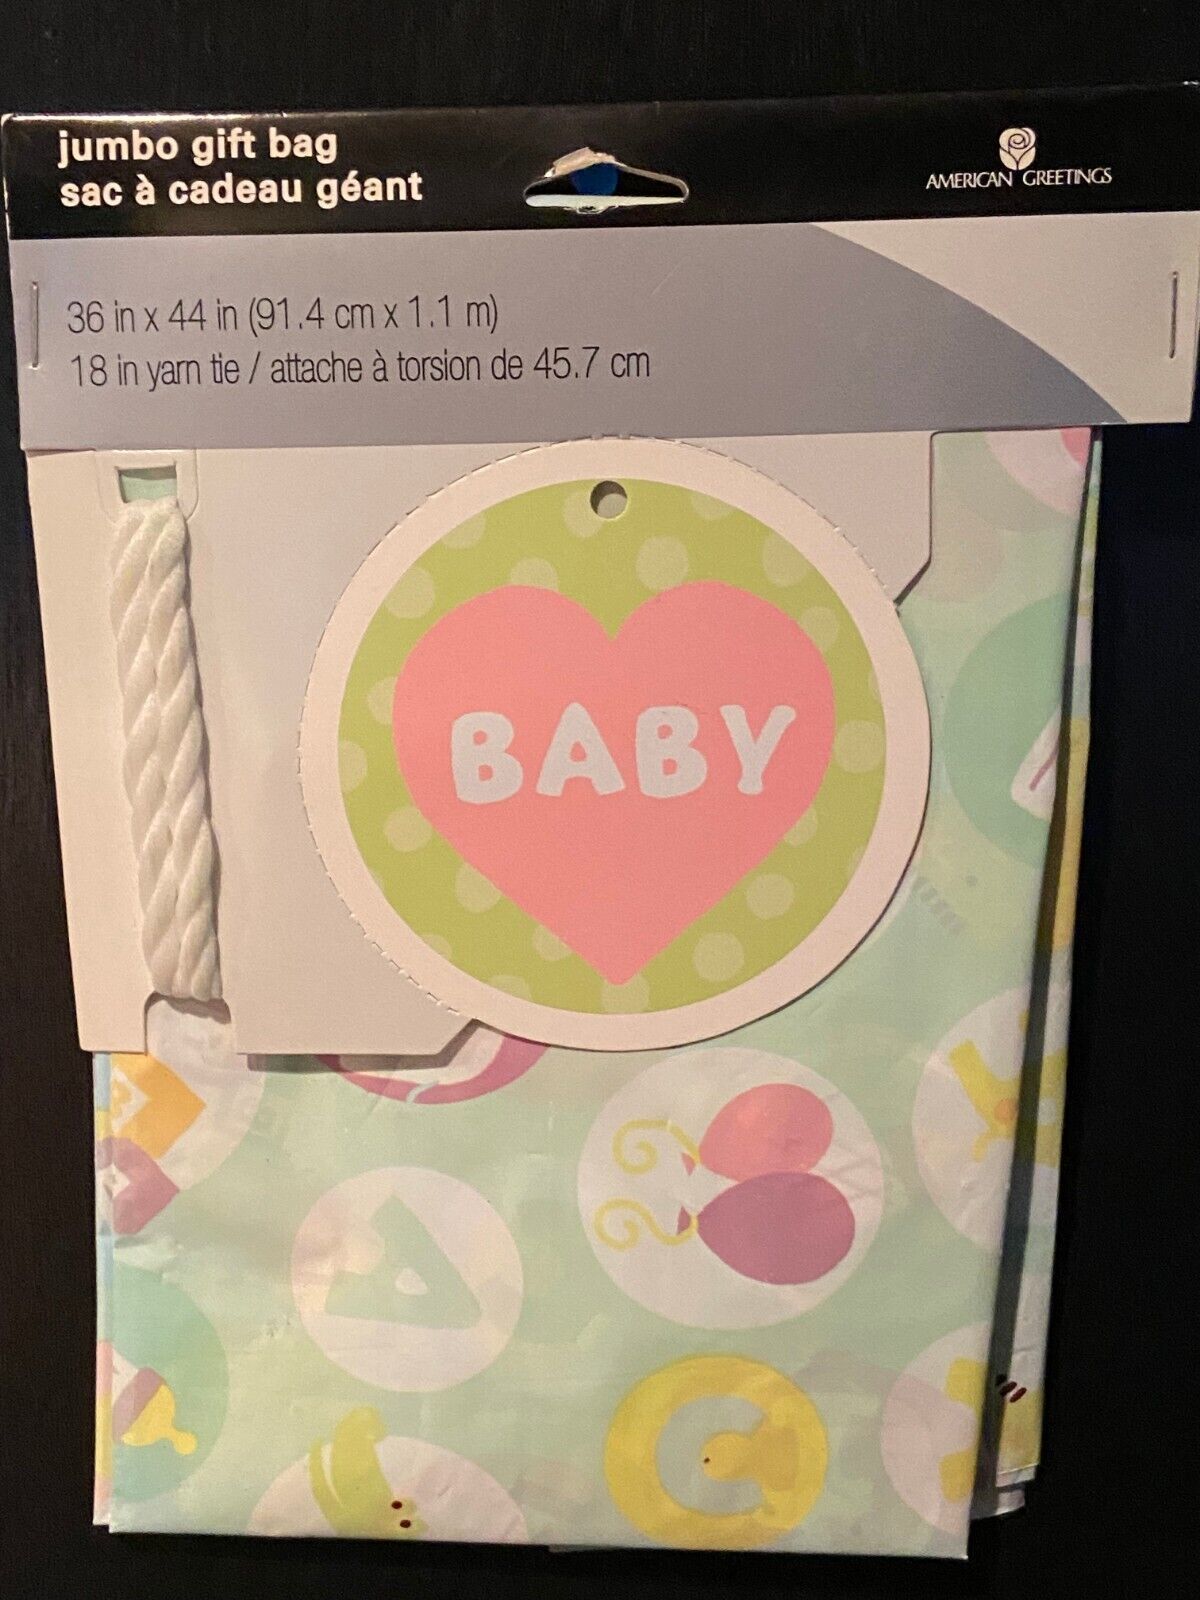 Primary image for 1 American Greetings Super Gift Bag BABY 36" x 44" *NEW* x1